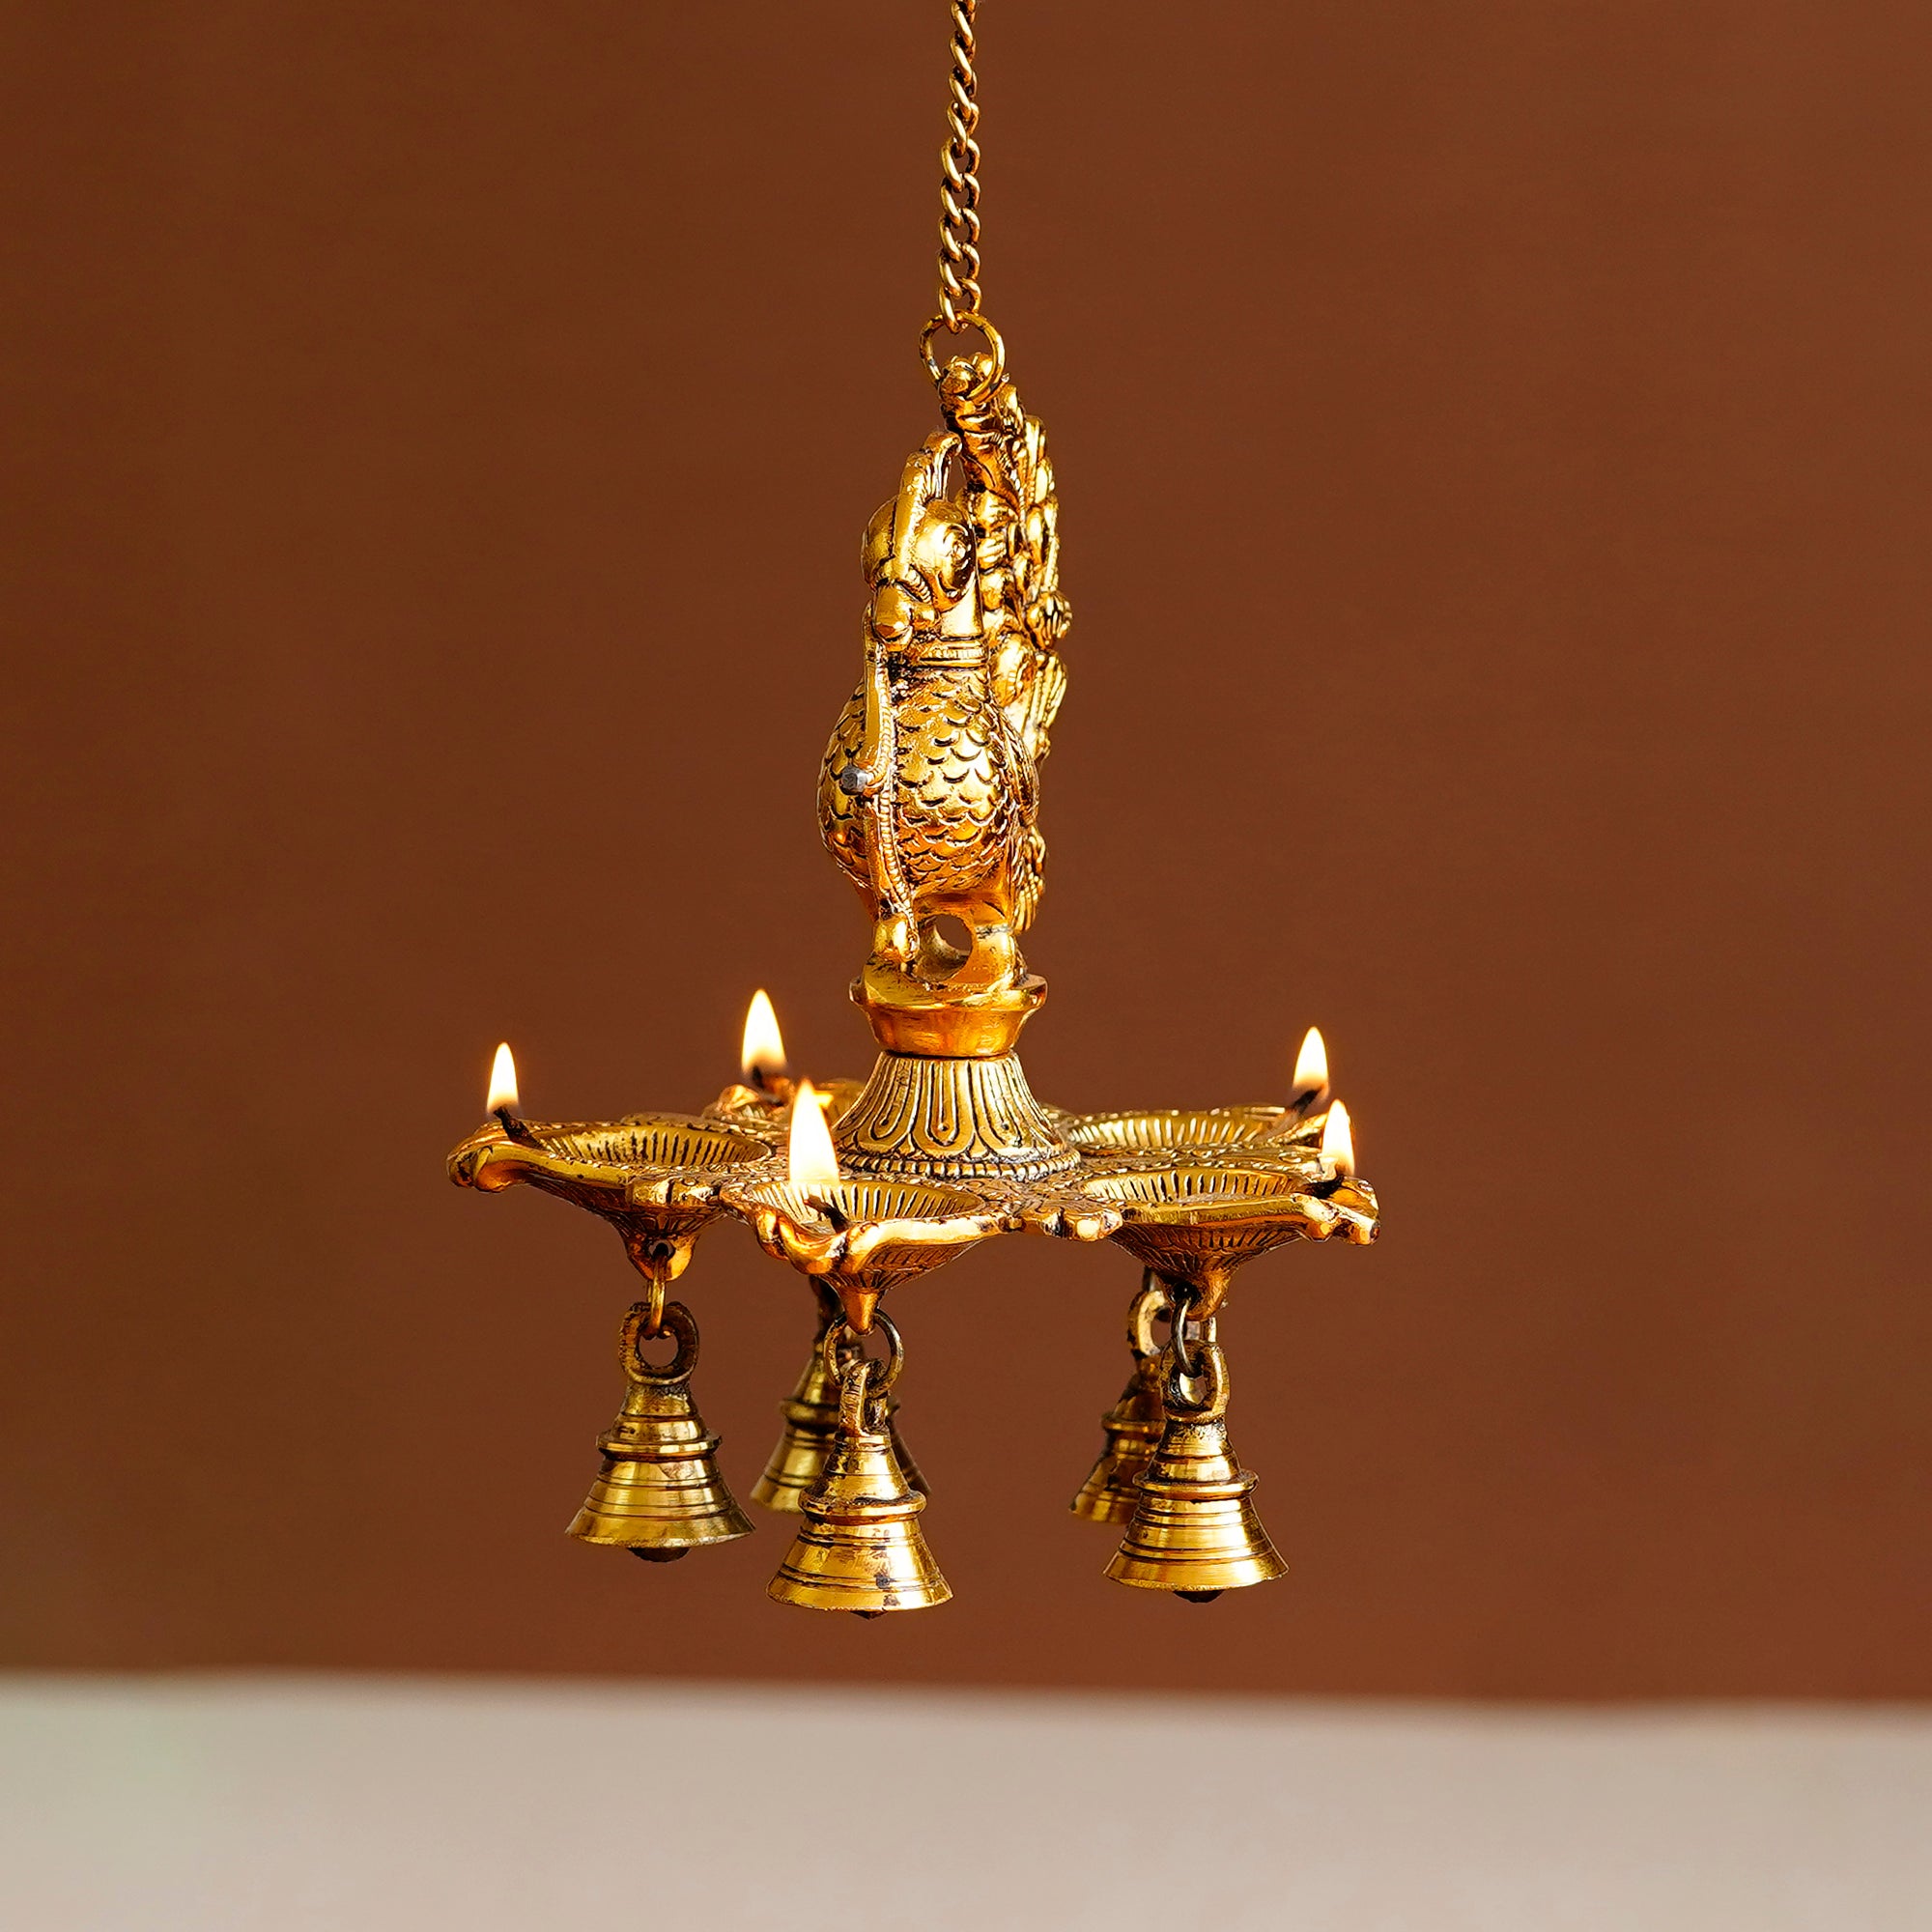 Five Wicks Decorative Peacock Diya With Bell Metal Wall Hanging With Chain